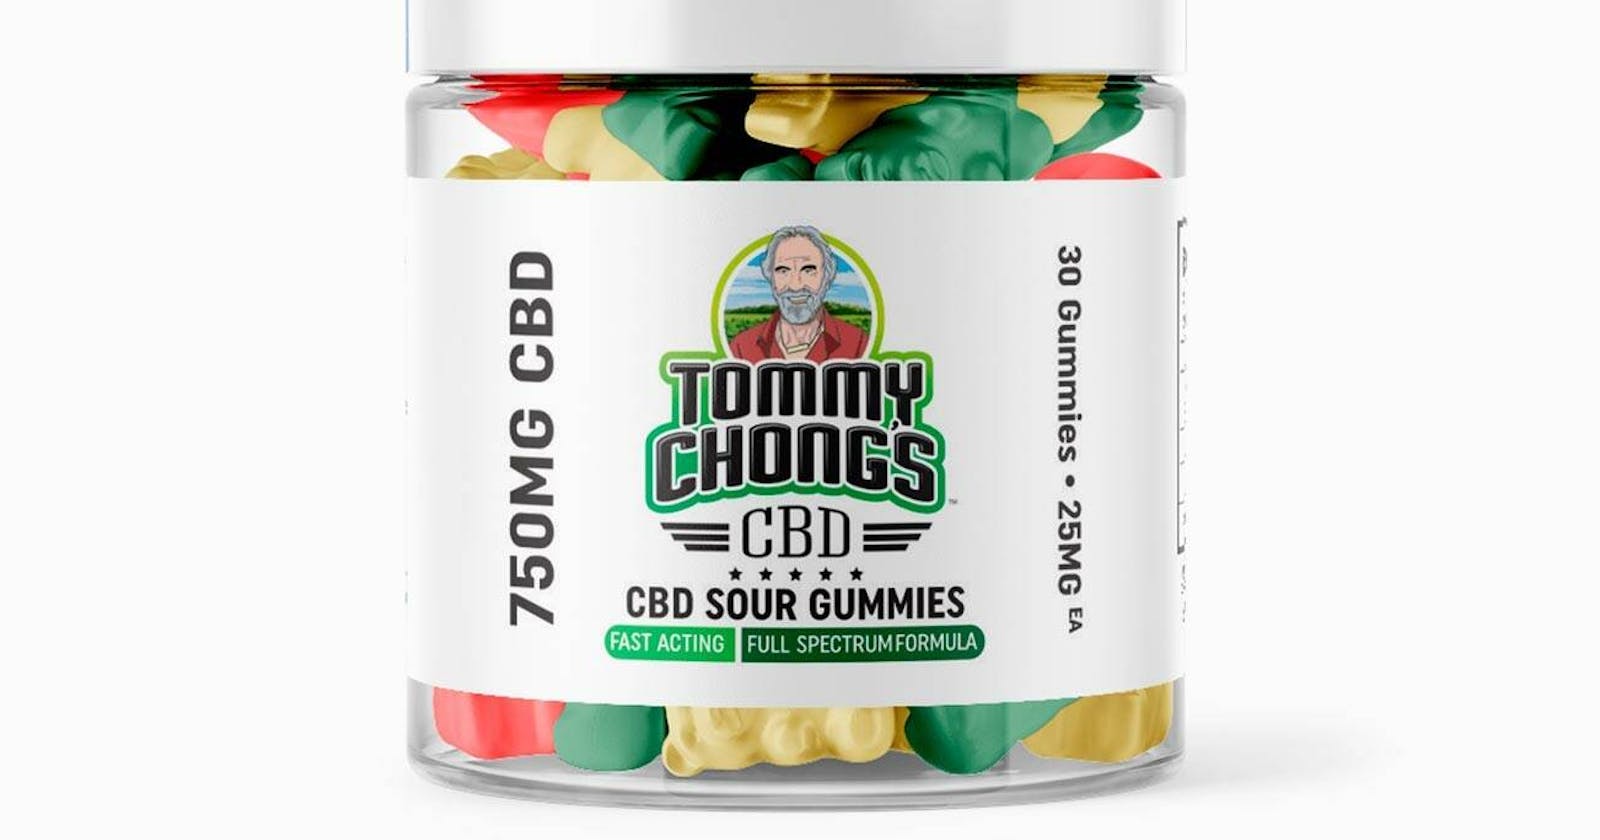 Tommy Chong CBD Gummies Reviews : Is It Work Or Not? Check Results!